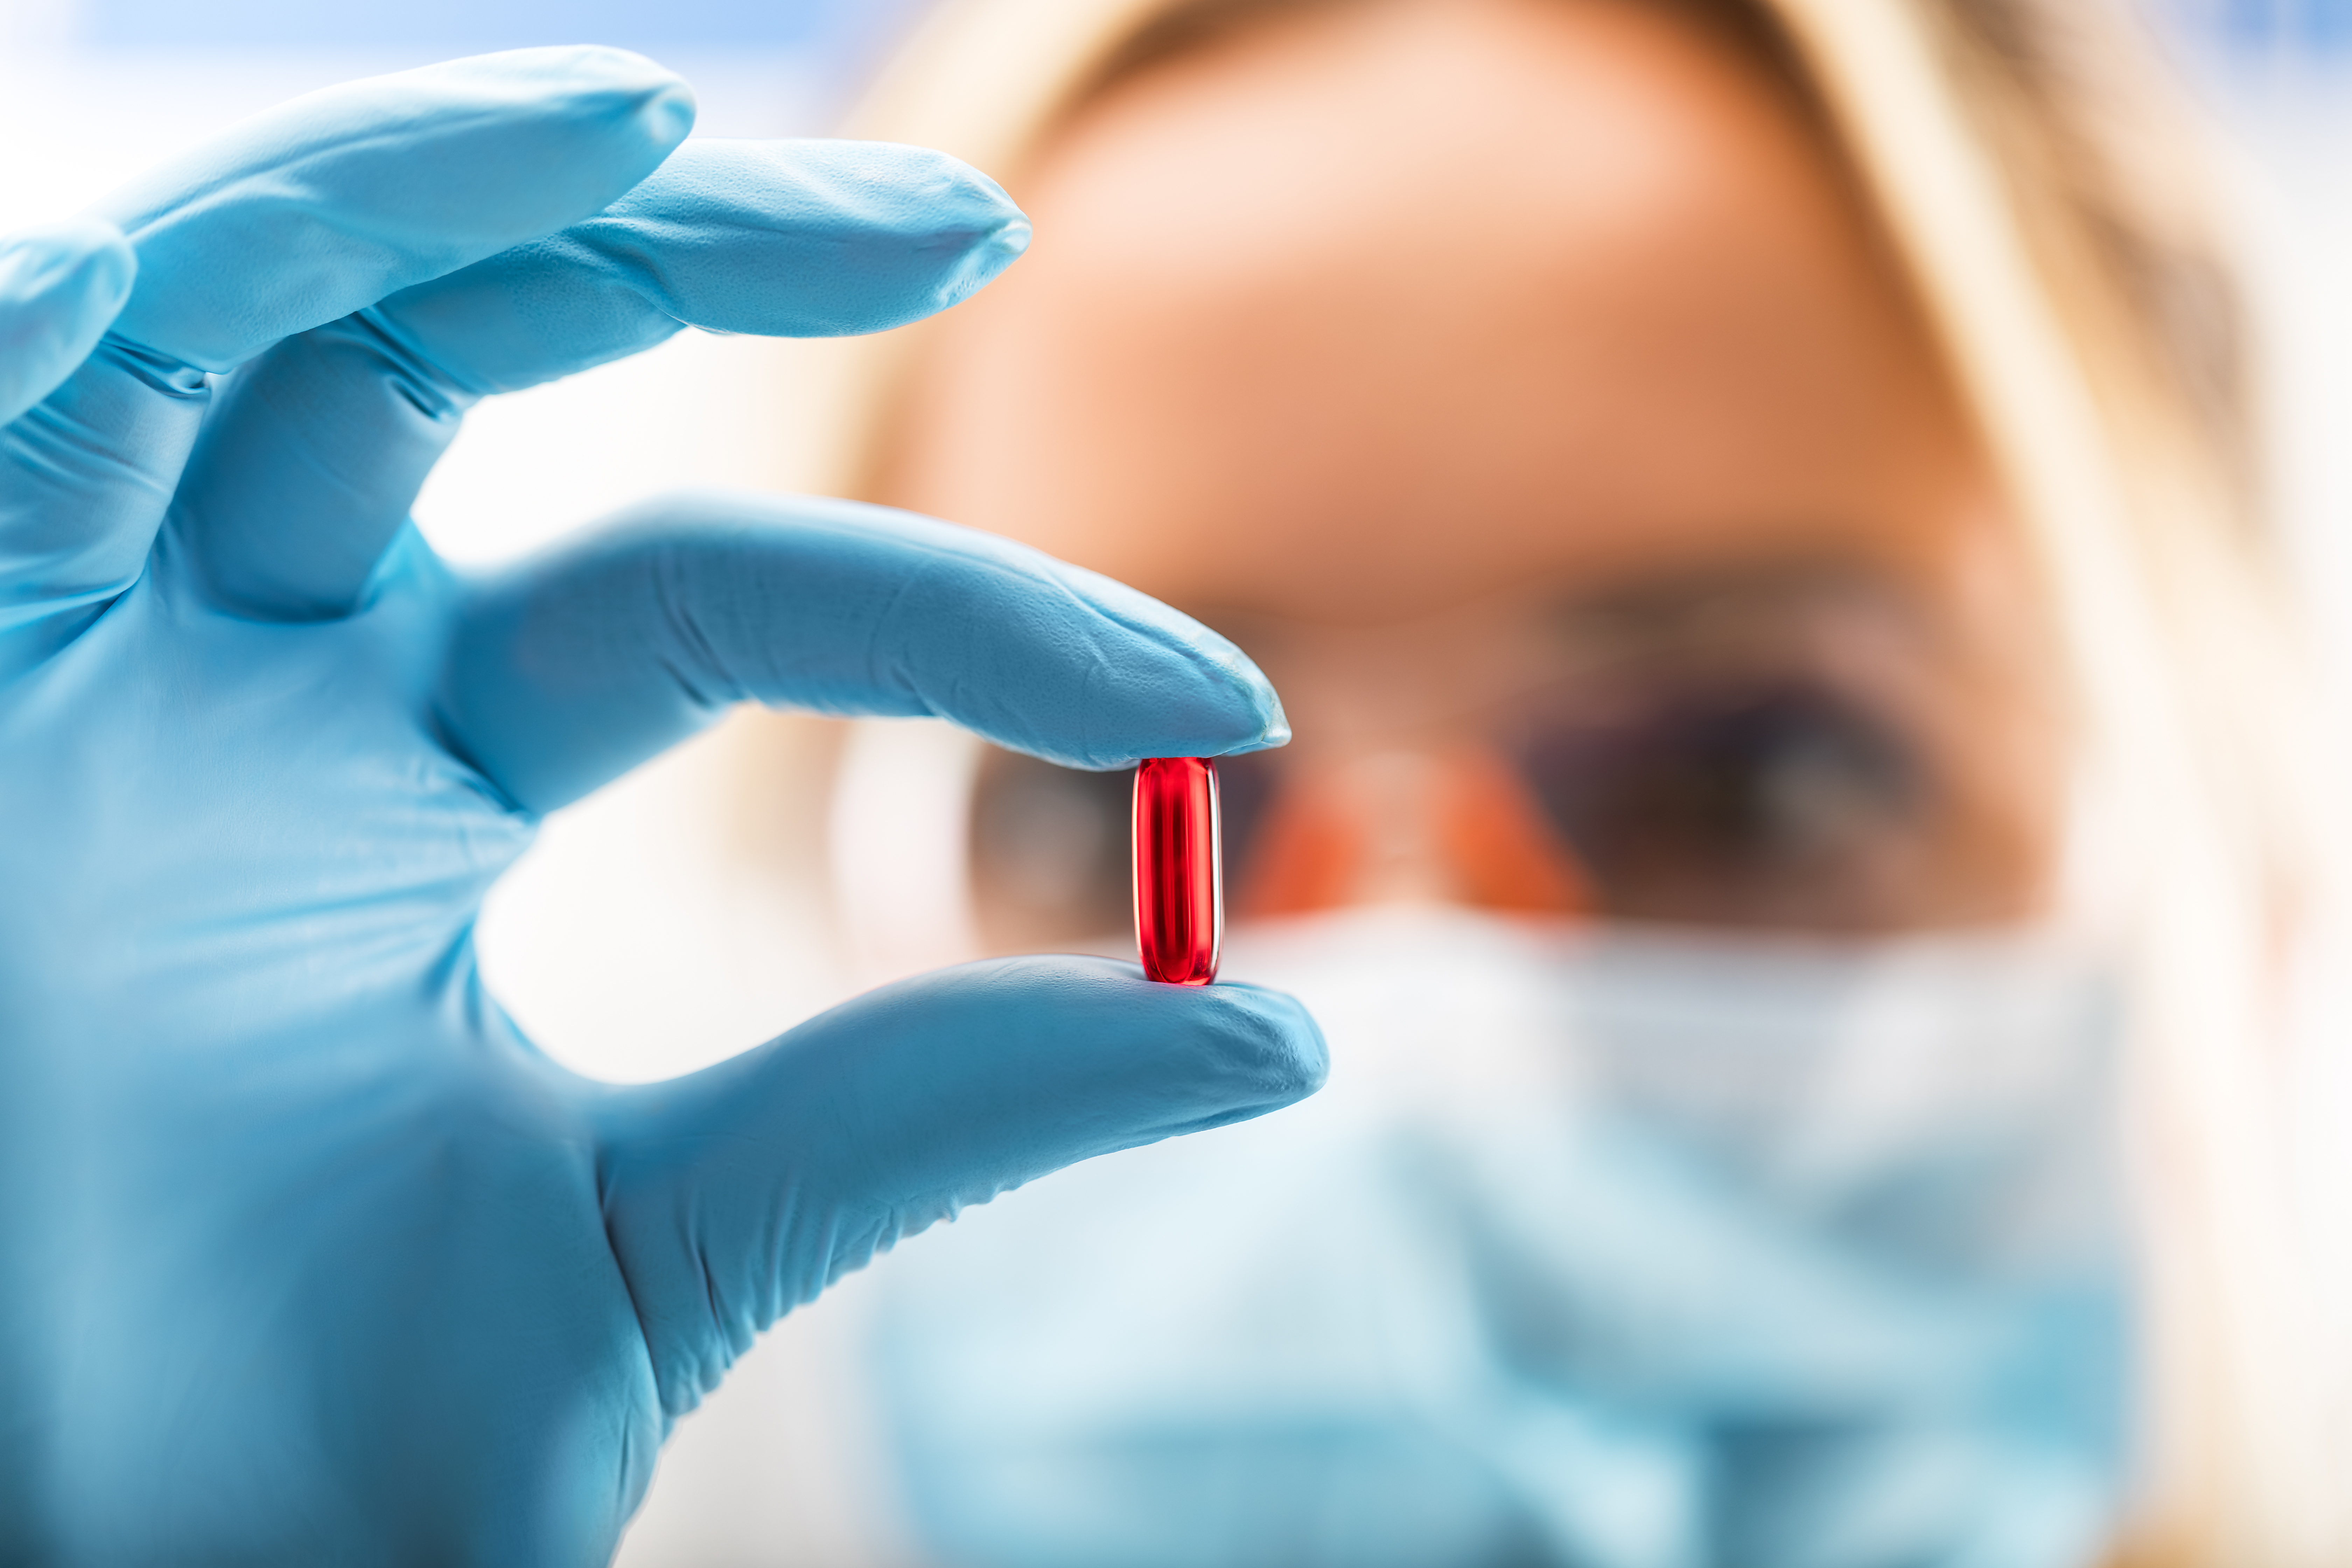 A woman scientist holding a red pill between her fingers with gloves on